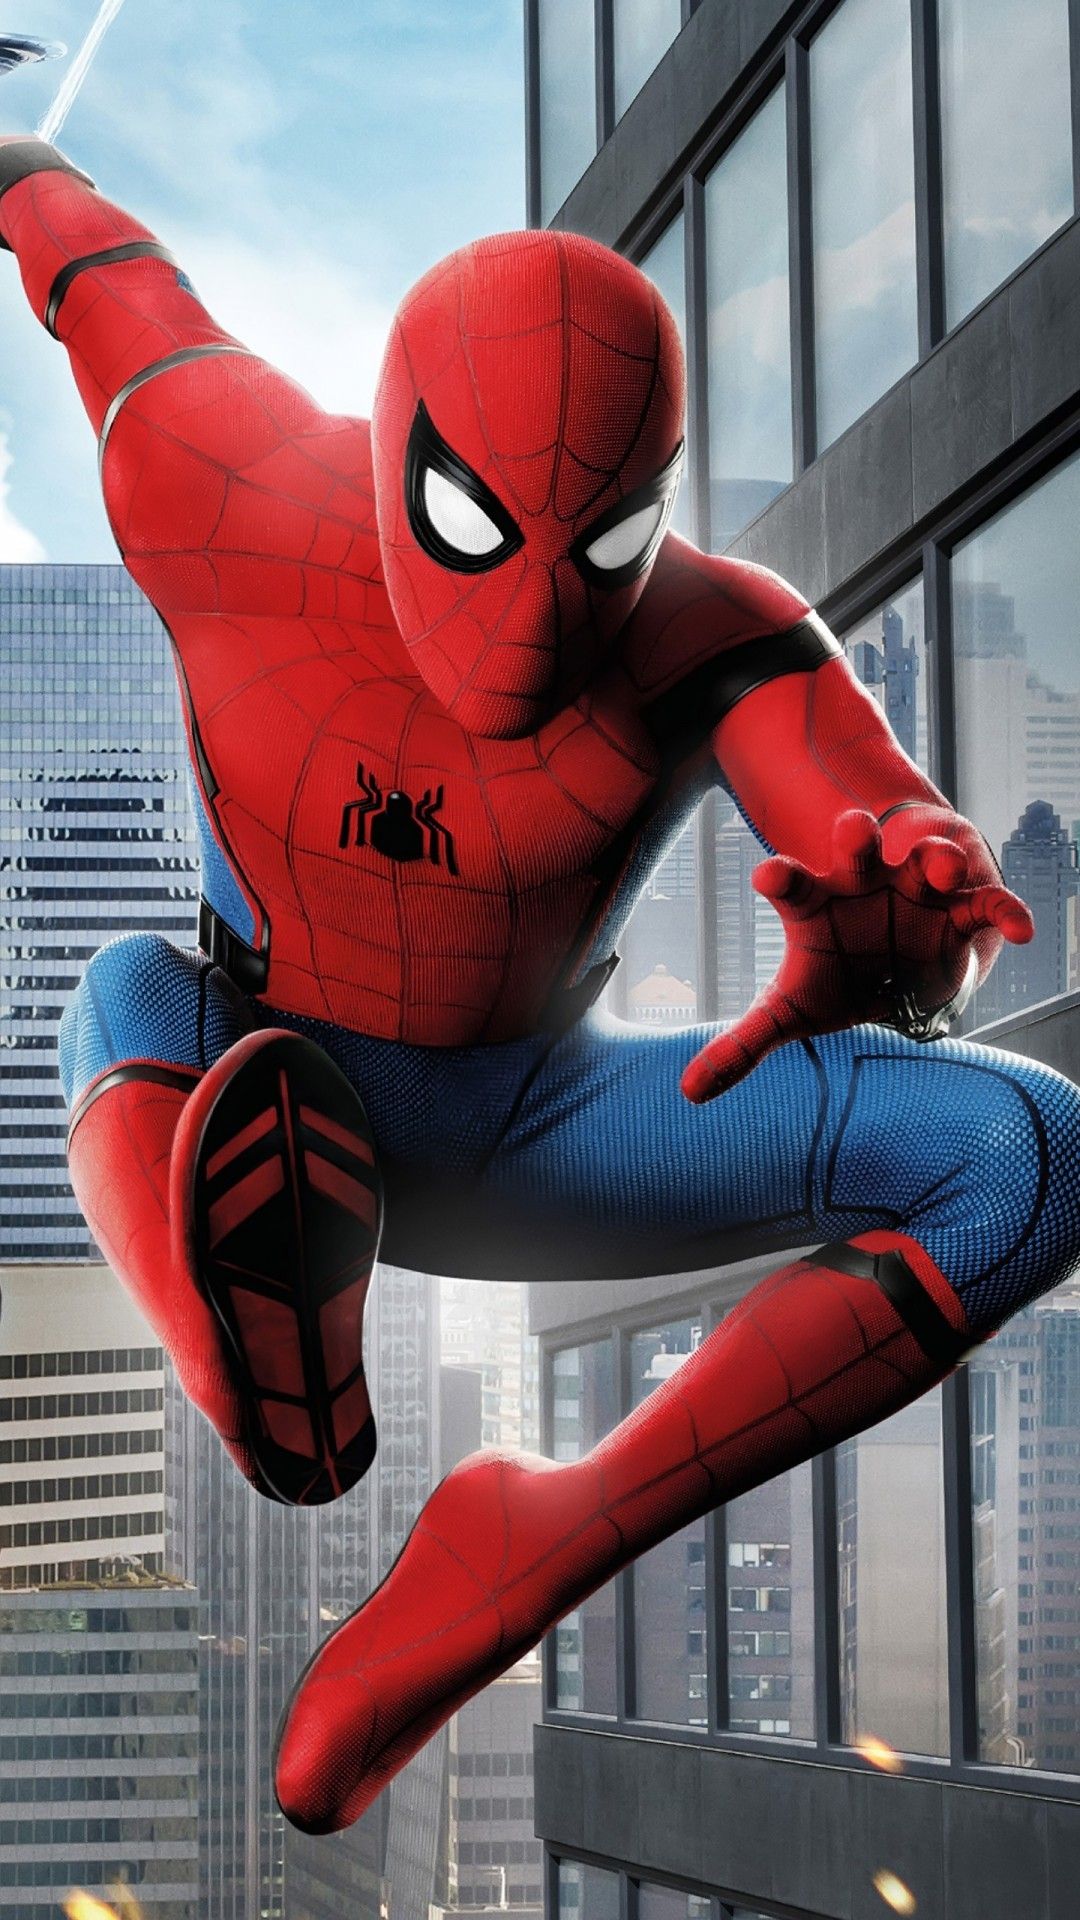 Spider Man Cell Phone Wallpaper Free Spider Man Cell Phone Background